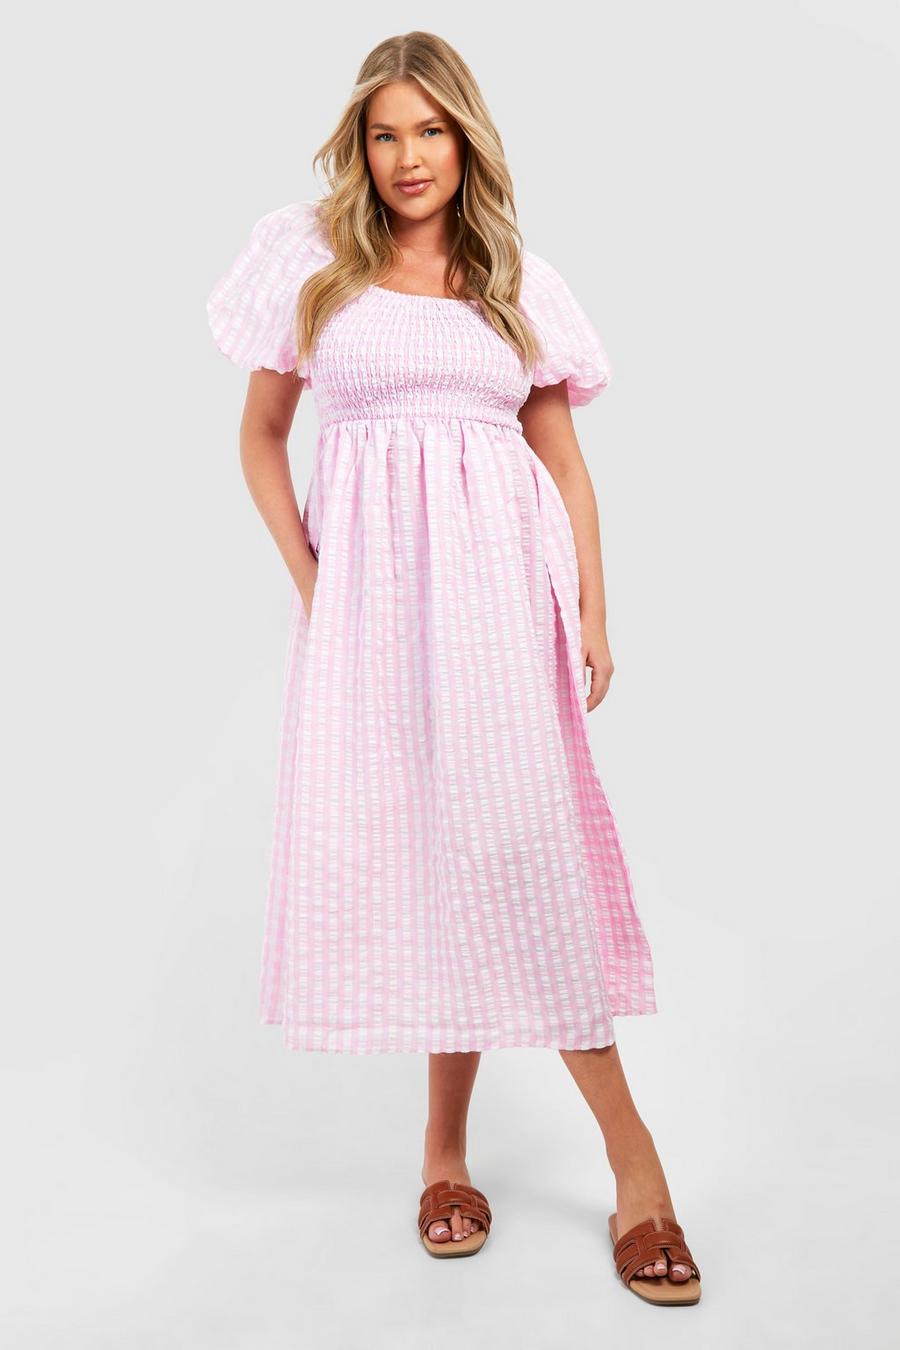 Pink Gingham Dress - Lace & Lashes